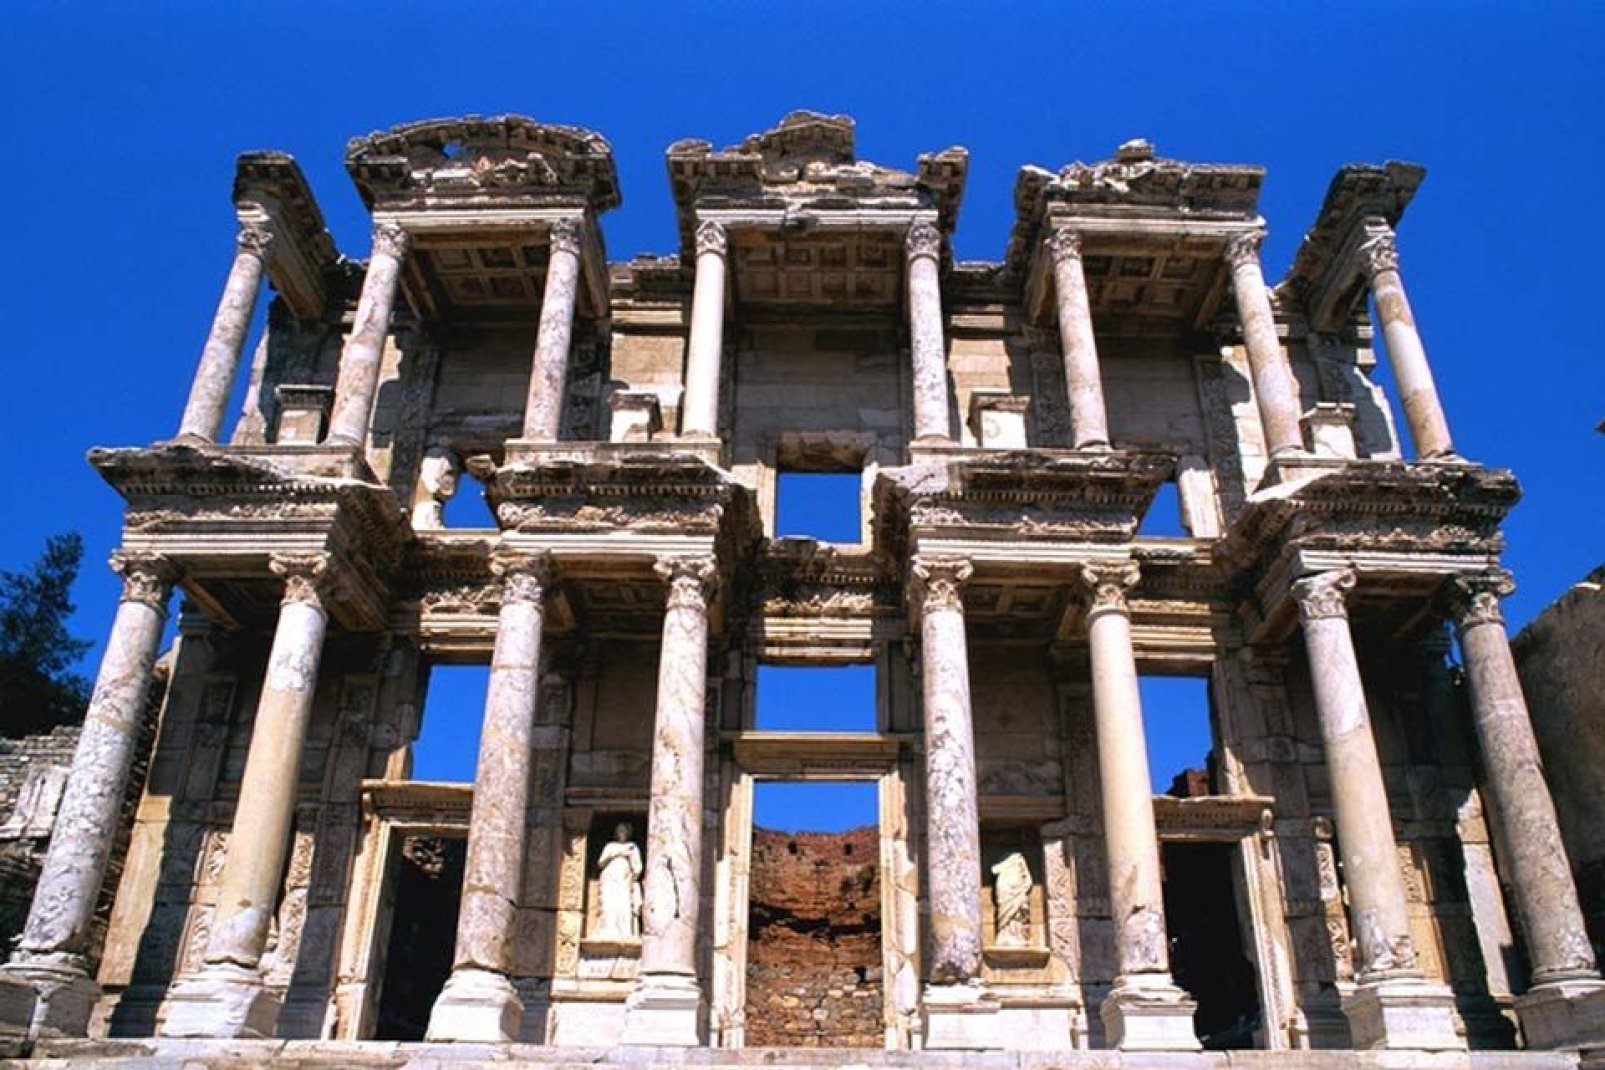 Celsus Library is located in Ephesus, one of the ancient parts of the Izmir region.